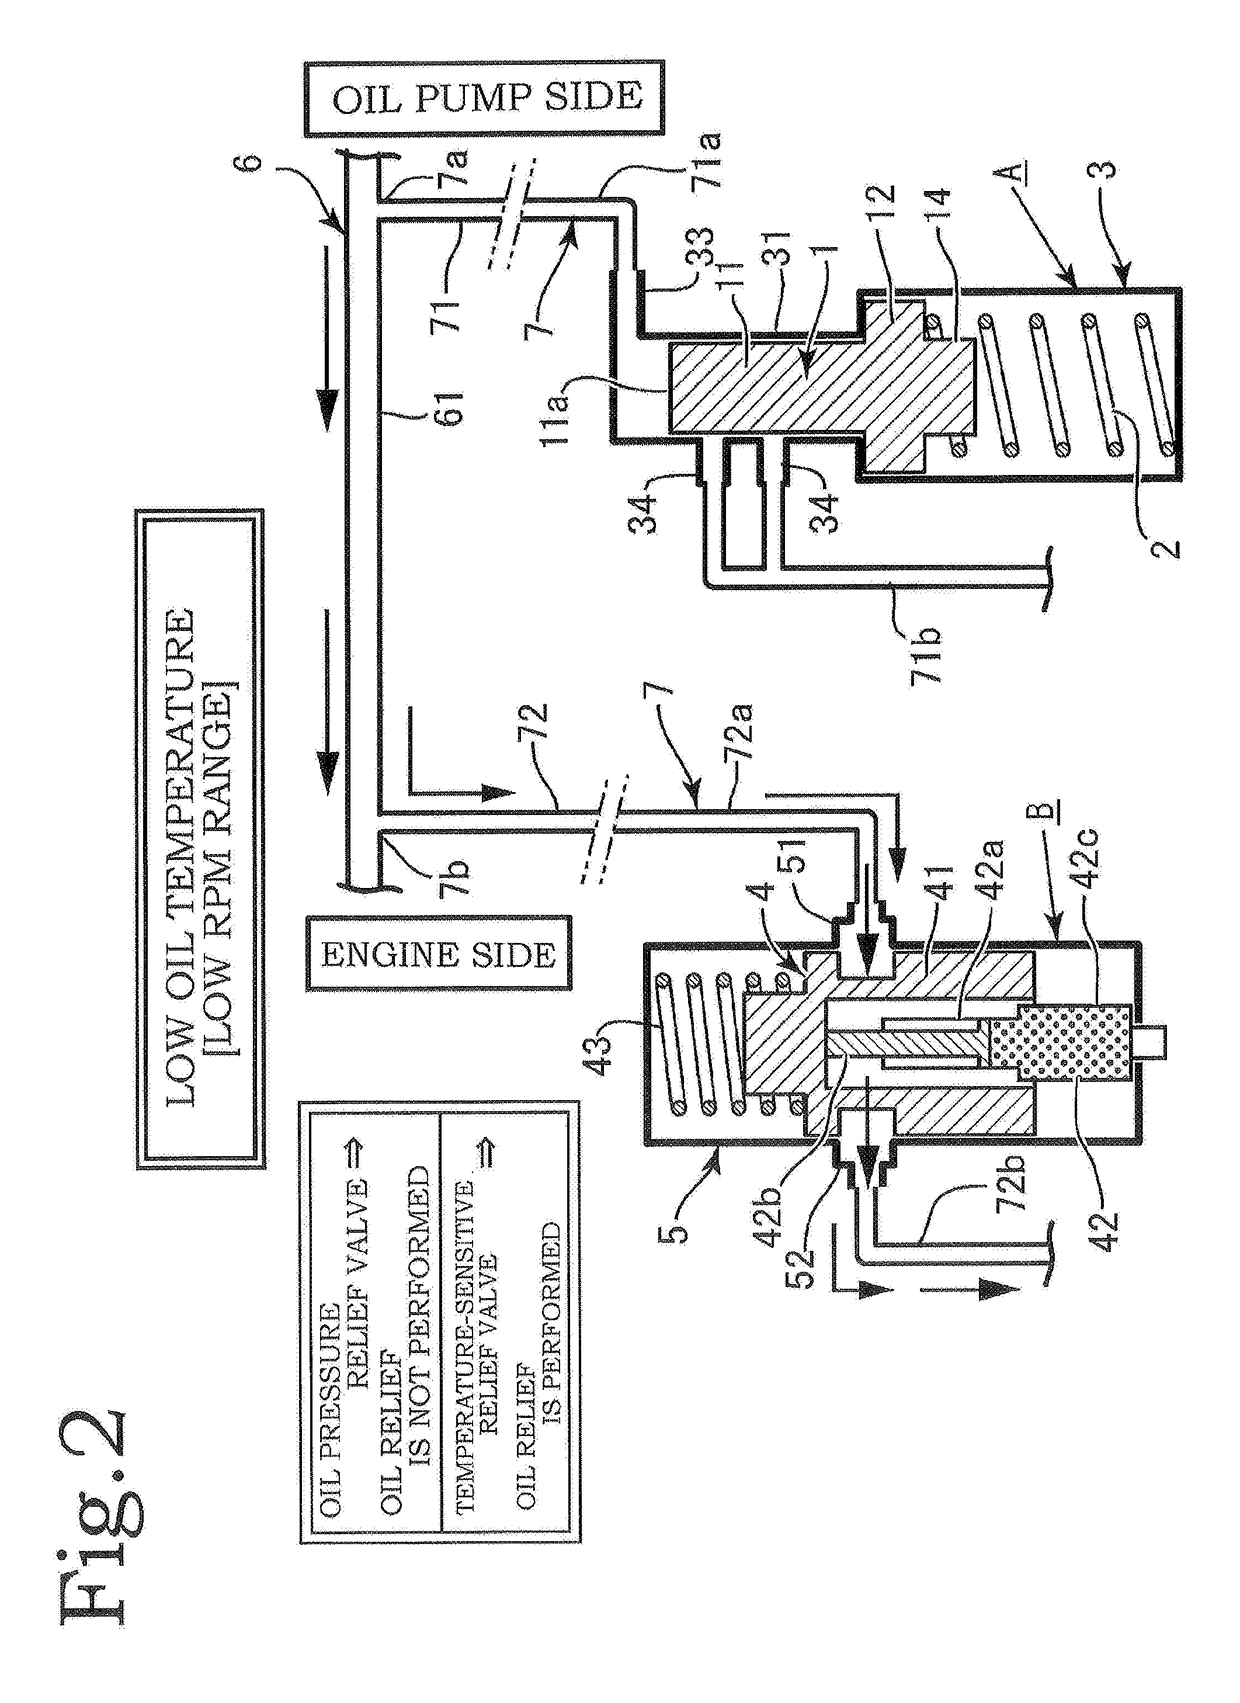 Relief device of oil circuit of engine